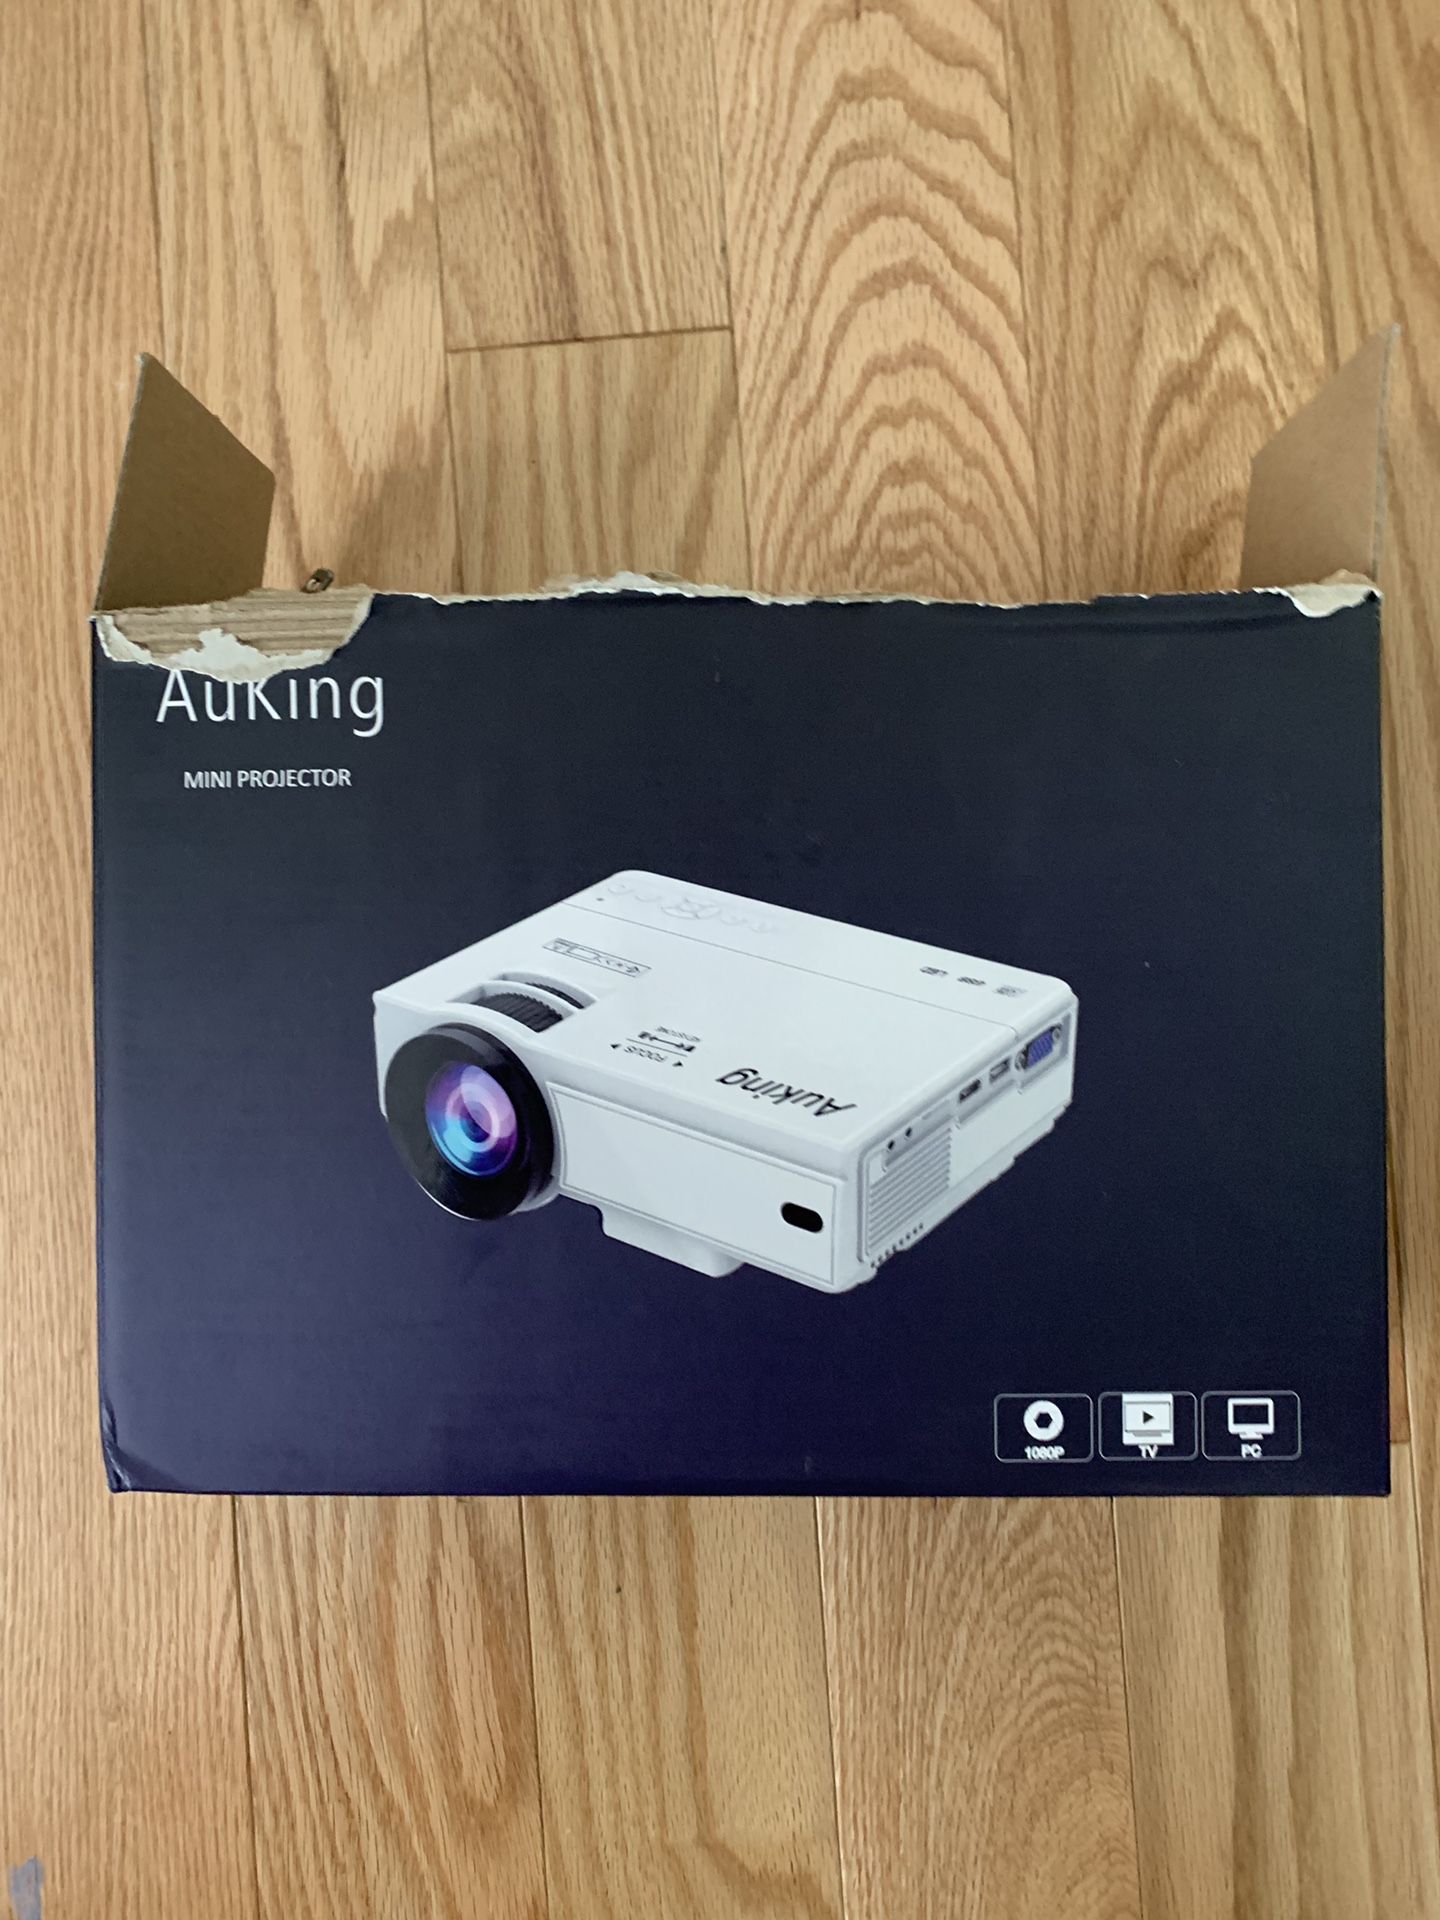 AuKing projector